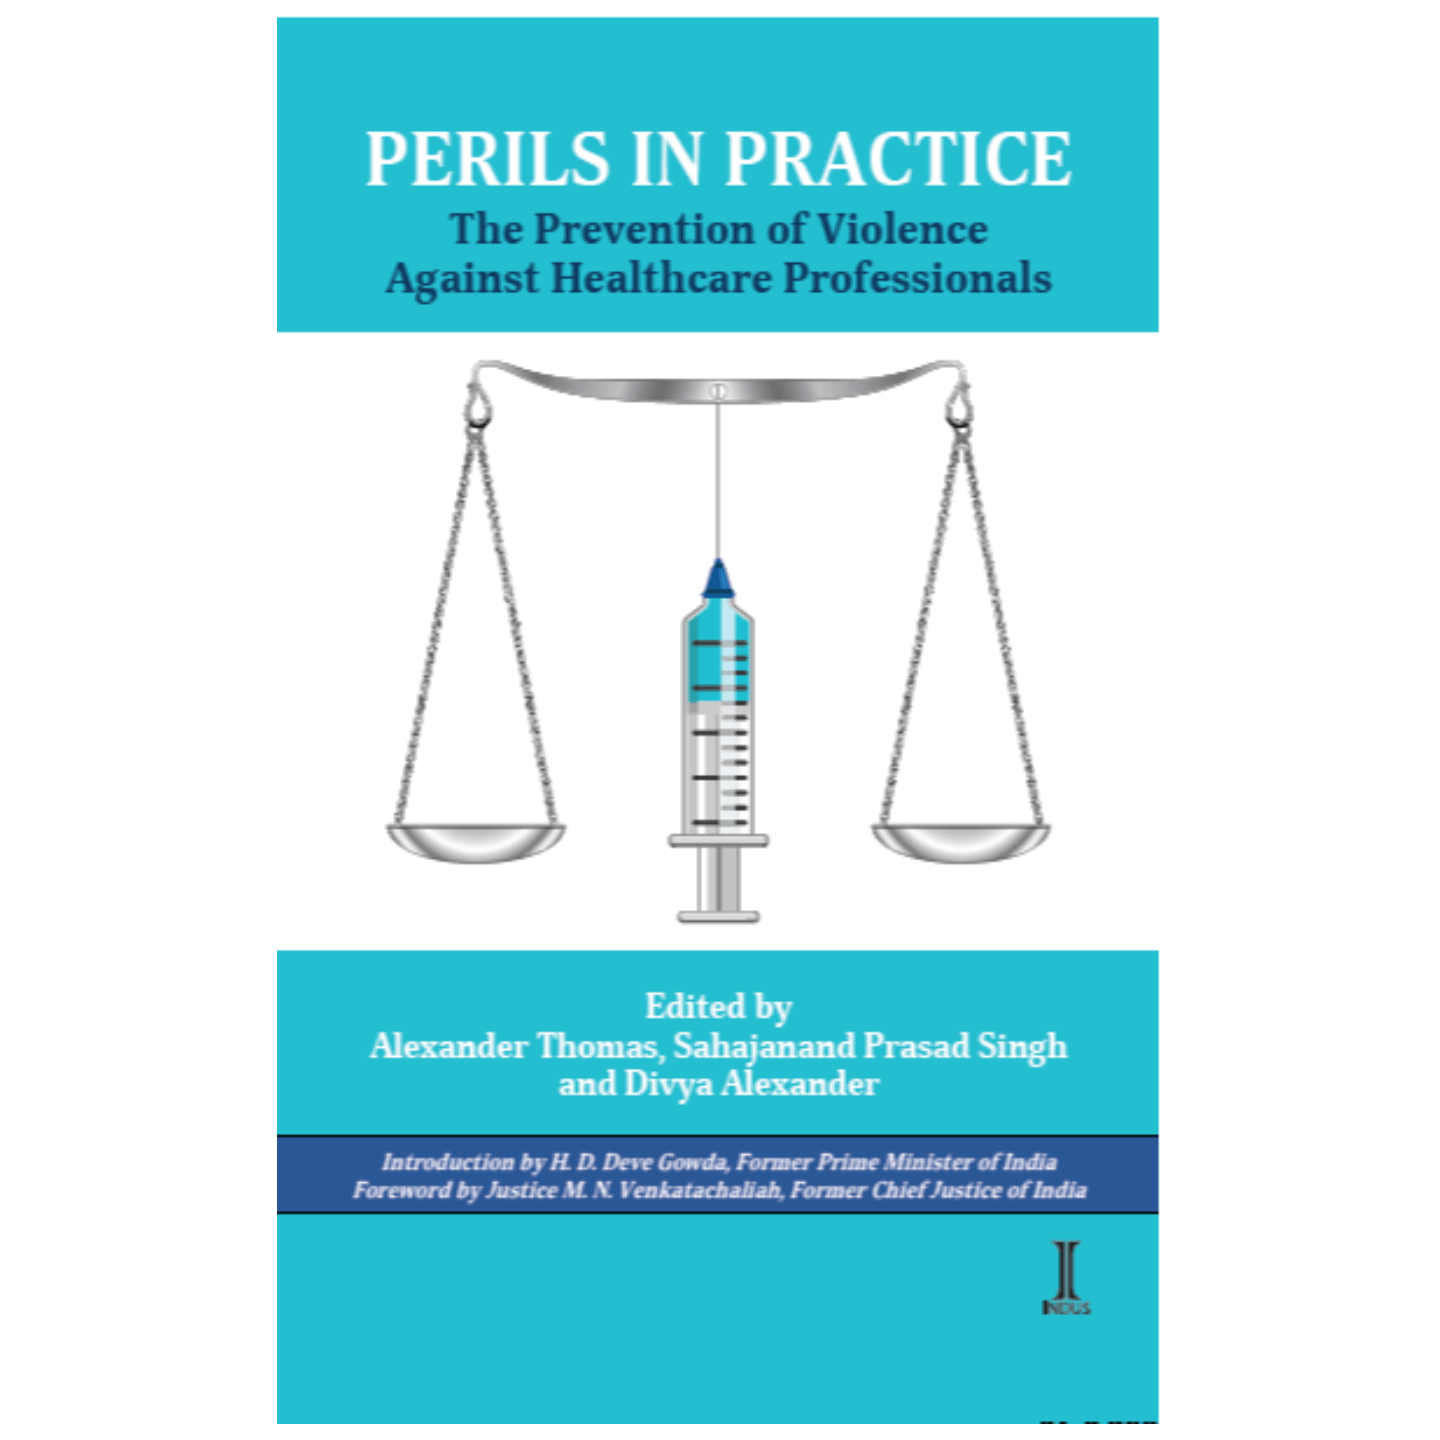 Perils in Practice: The Prevention of Violence Against Healthcare Professionals